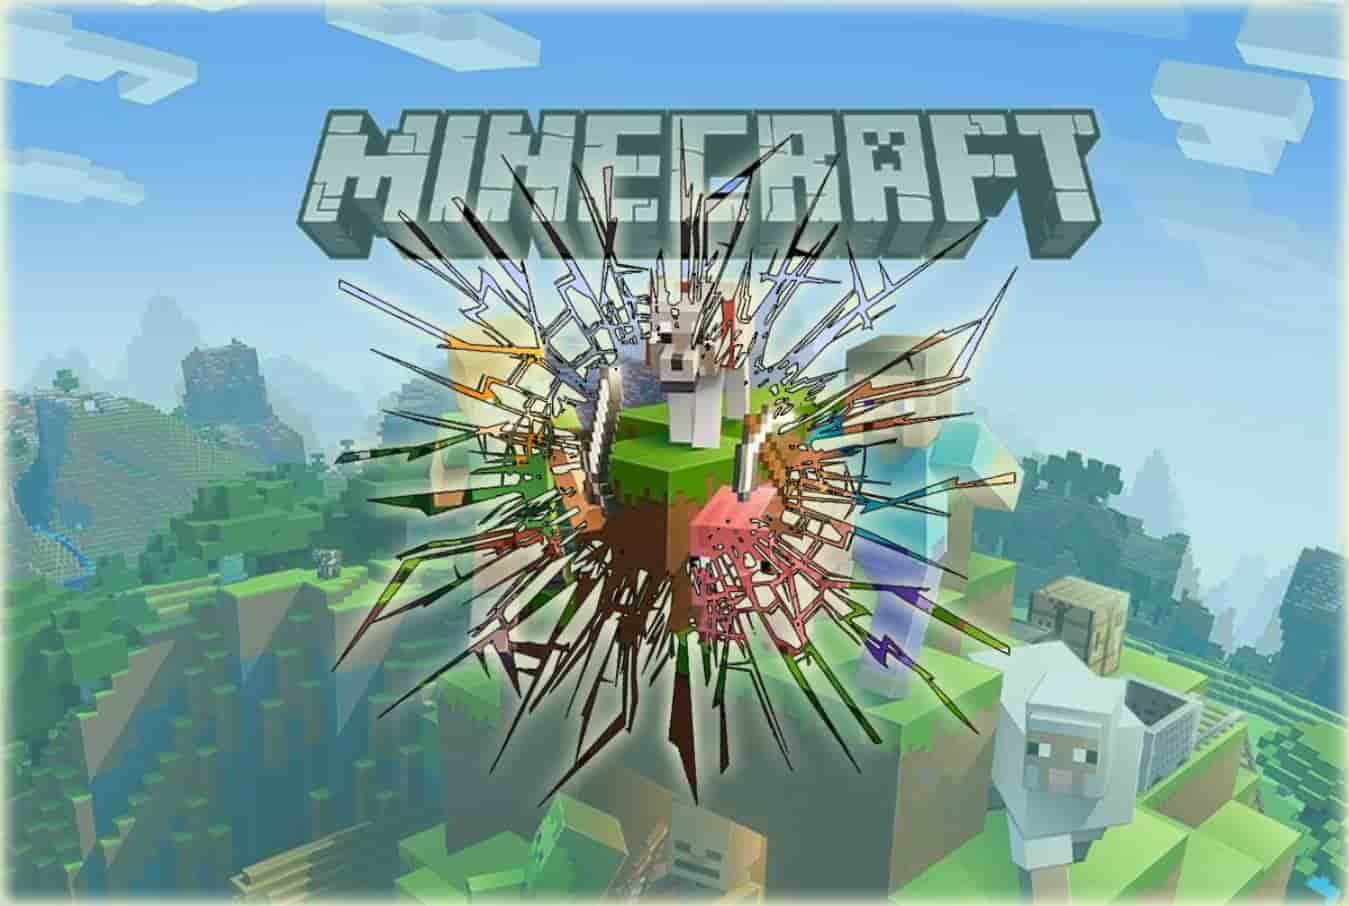 Minecraft free download 2020 safe How to remove virus in computer